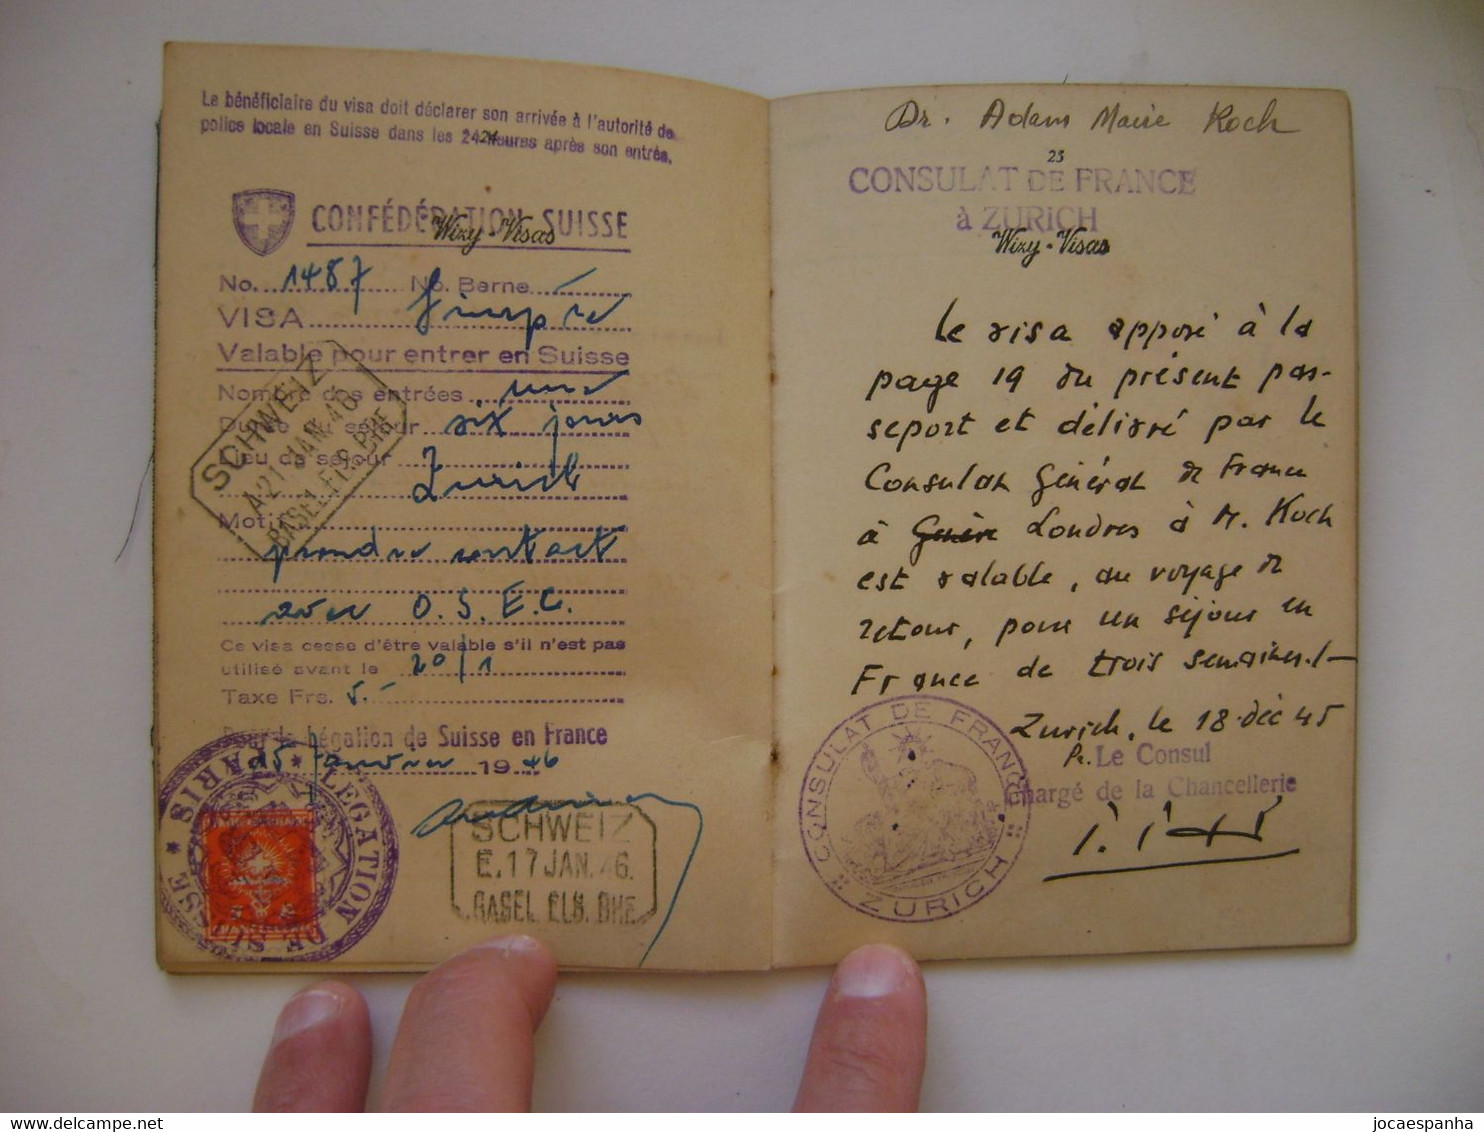 POLONIA / POLSKA - PASSPORT ISSUED BY THE CONSULATE IN LONDON IN 1945 IN THE STATE